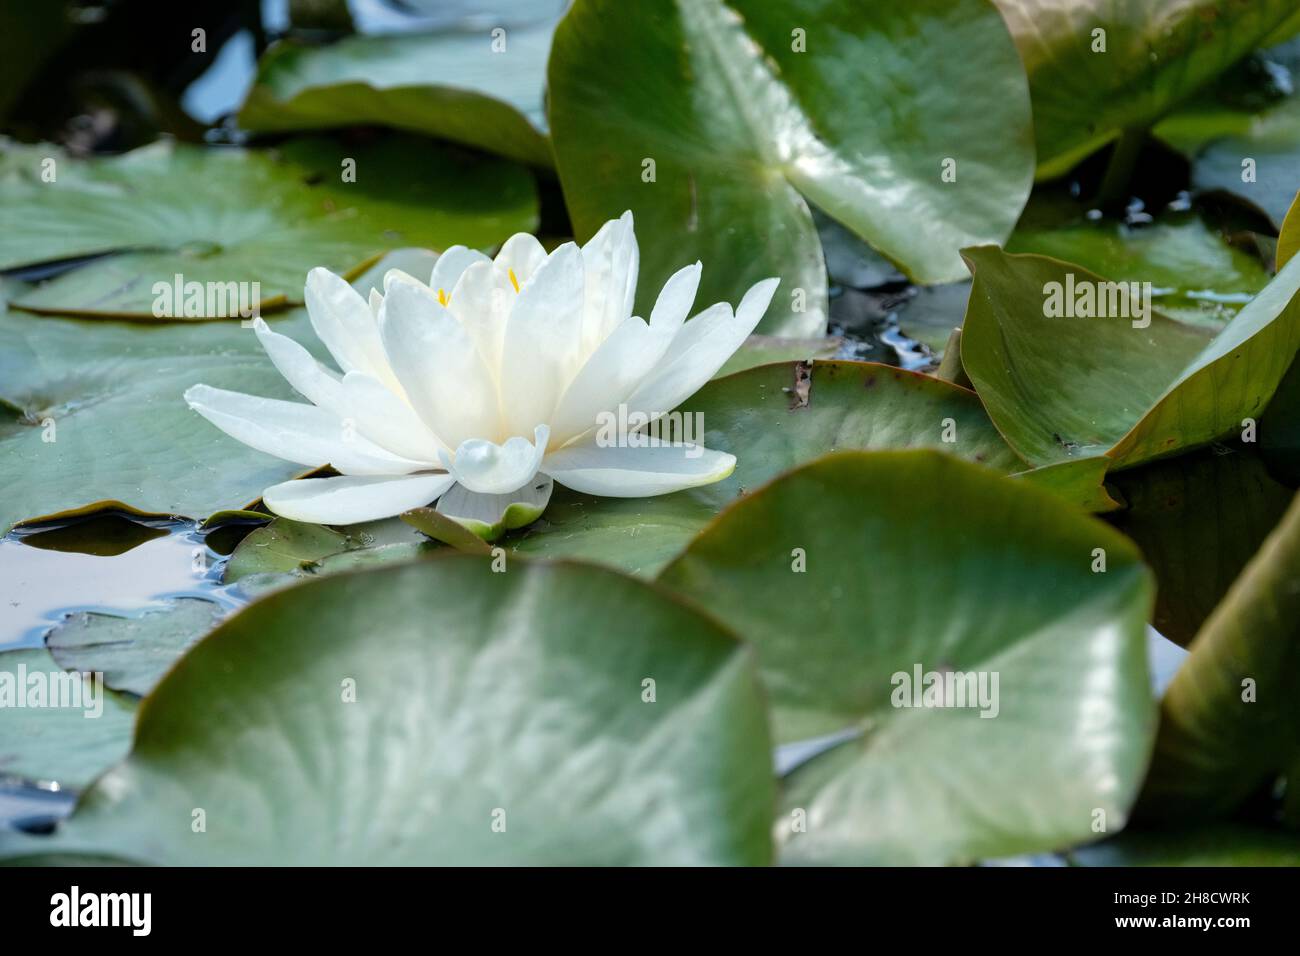 Nymphaea 'Gladstoniana', nénuphar 'Gladstoniana'.Grand nénuphars blanc. Banque D'Images